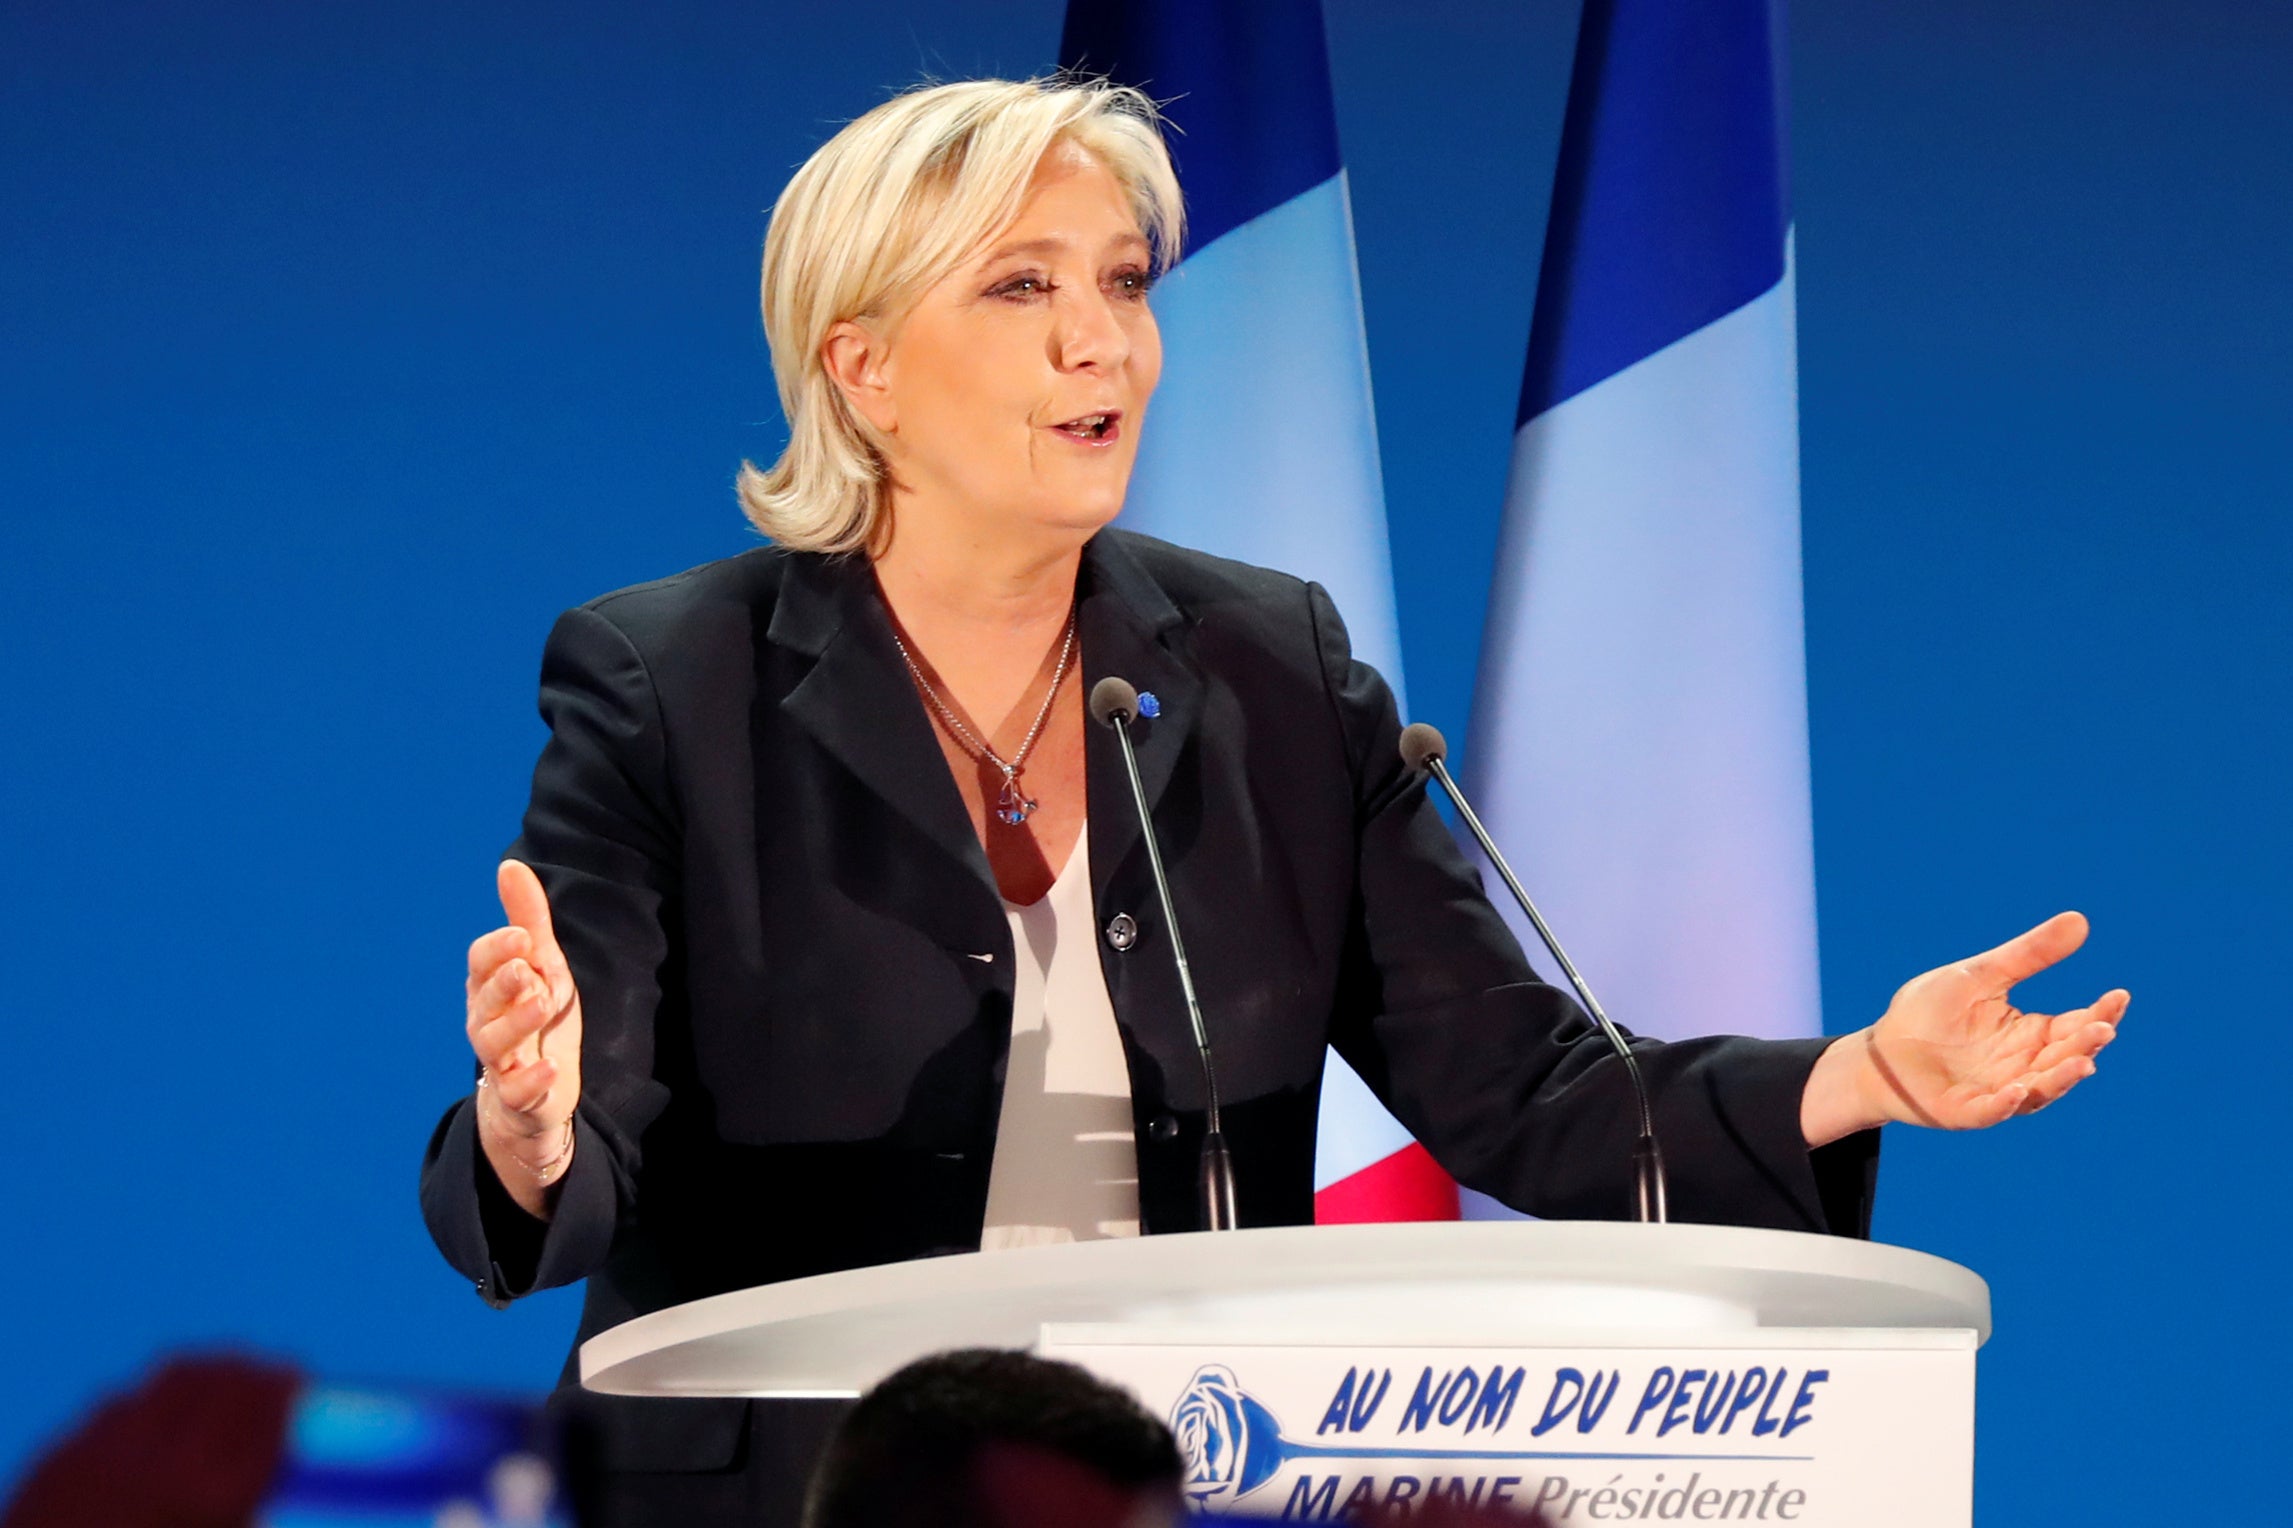 Marine Le Pen is facing off Macron in the second round of the French presidential election